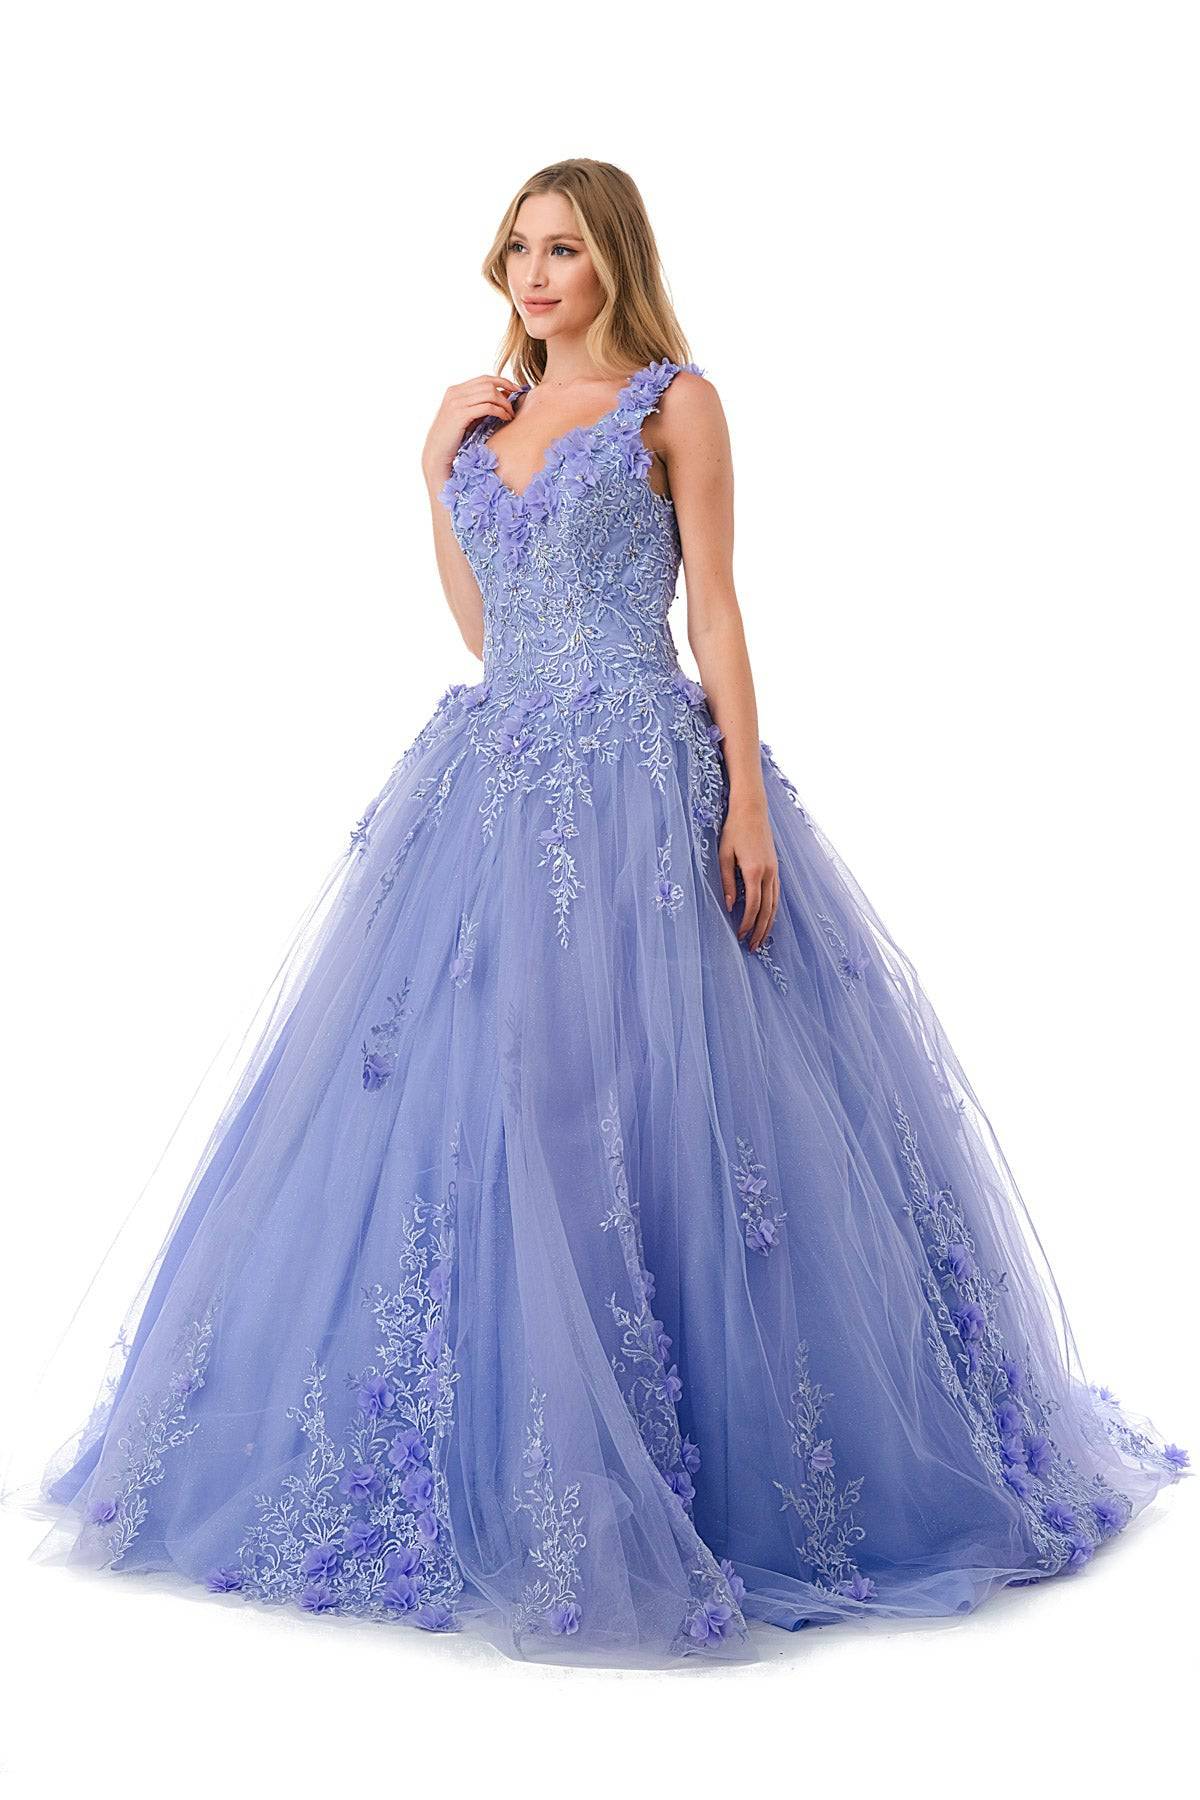 Aspeed L2729 Floral Lilac Ball Gown - NORMA REED